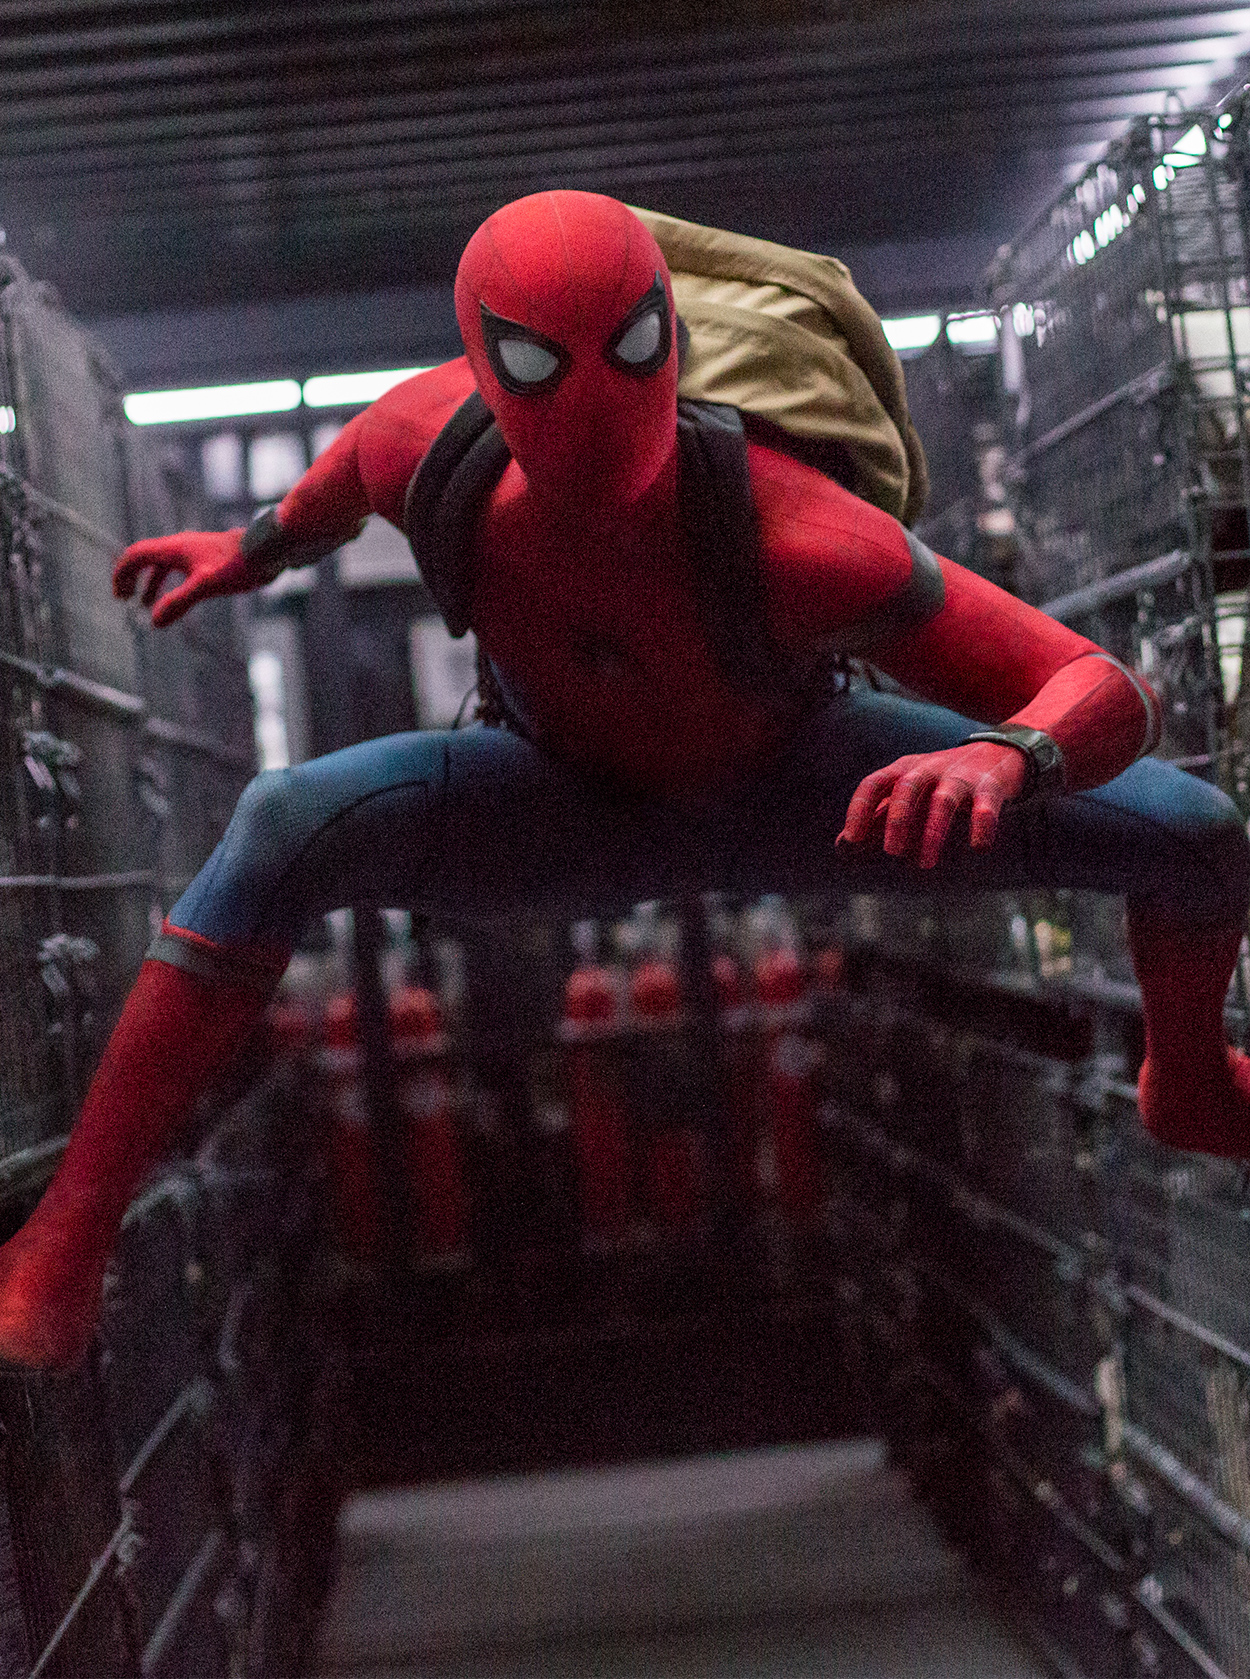 Spider-Man: Homecoming at an AMC Theatre near you.